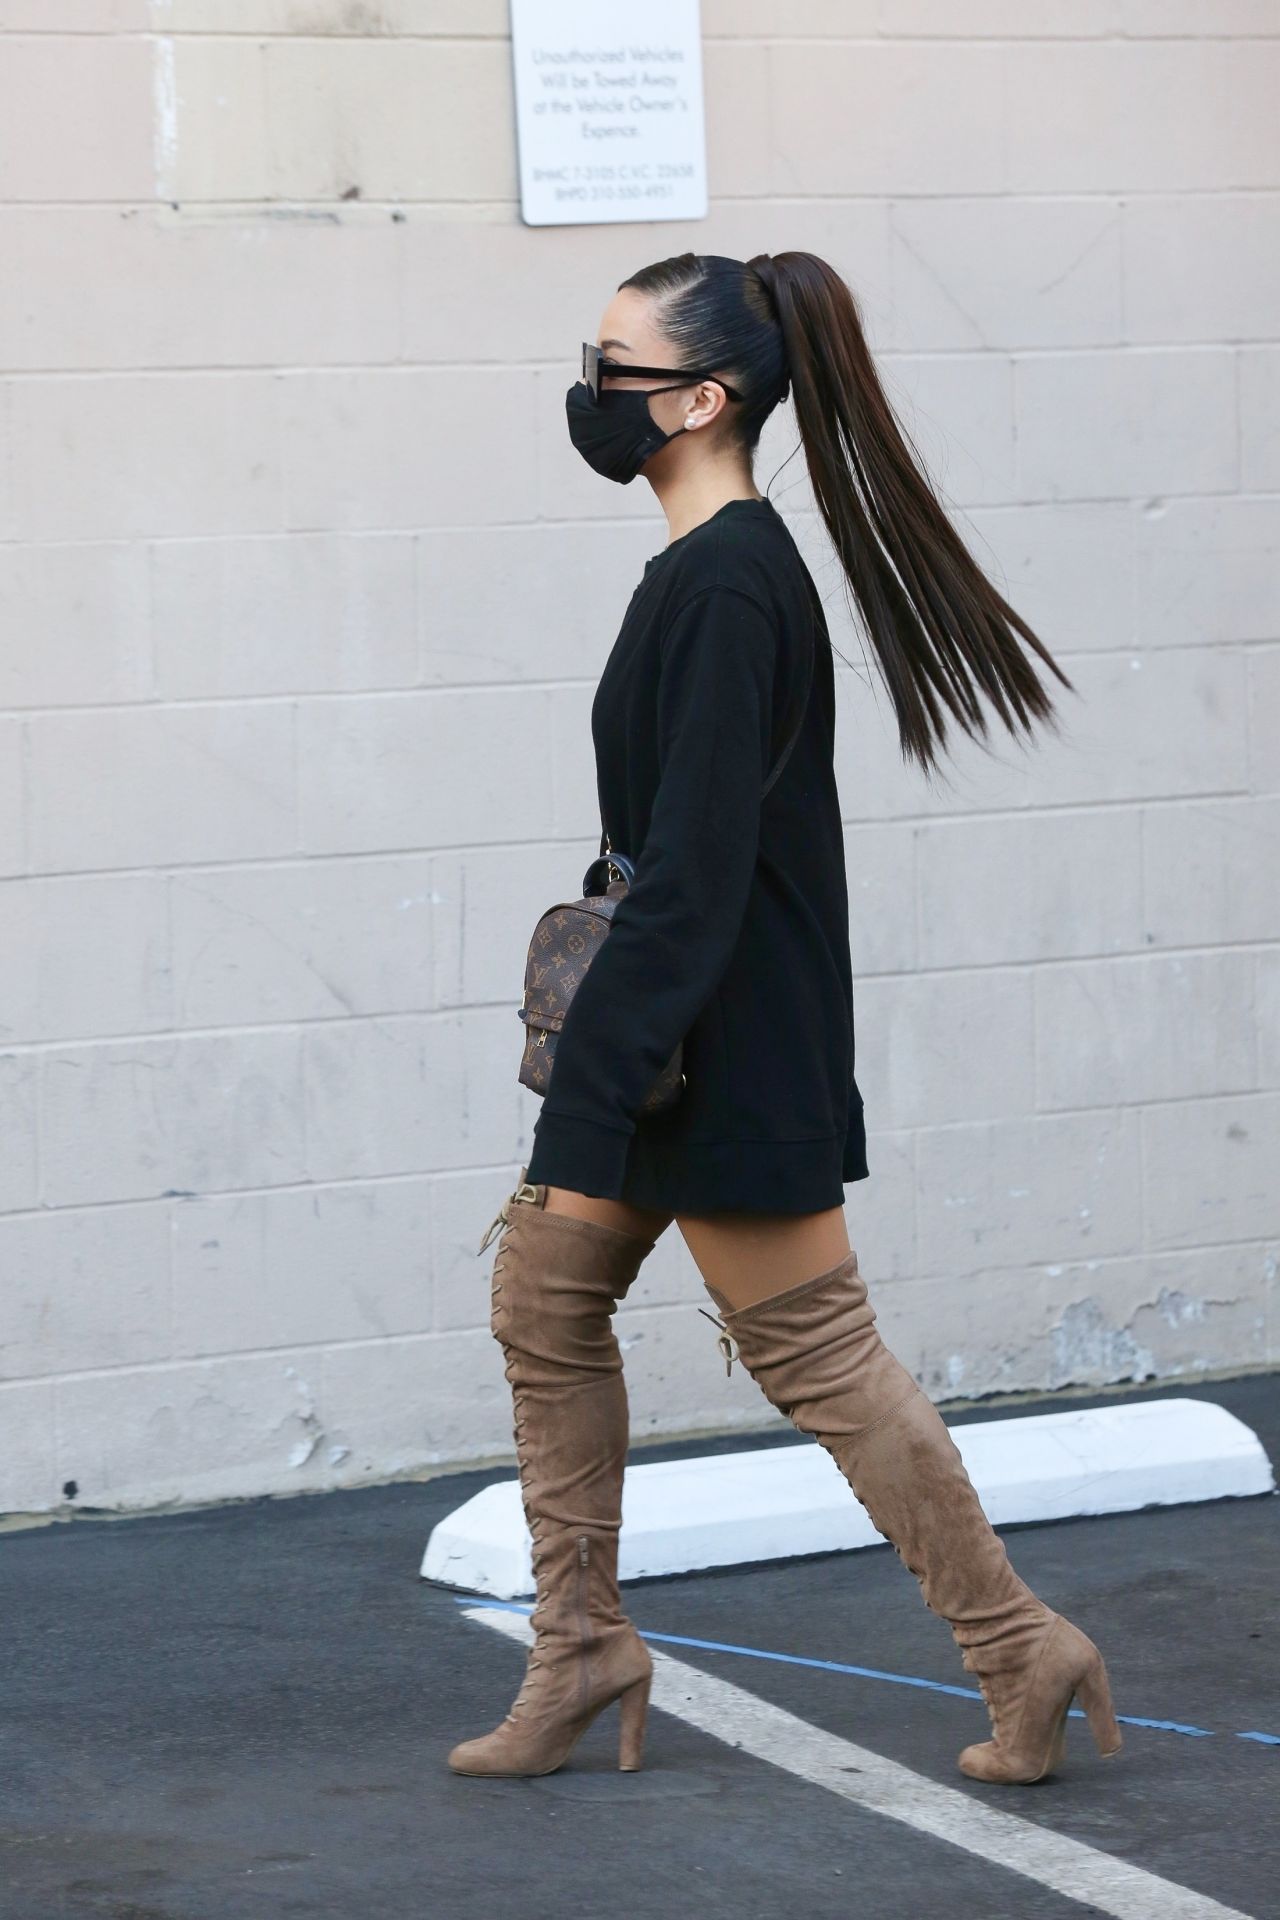 Ariana Grande In A Black Dress And Knee Beige Boots Beverly Hills 11